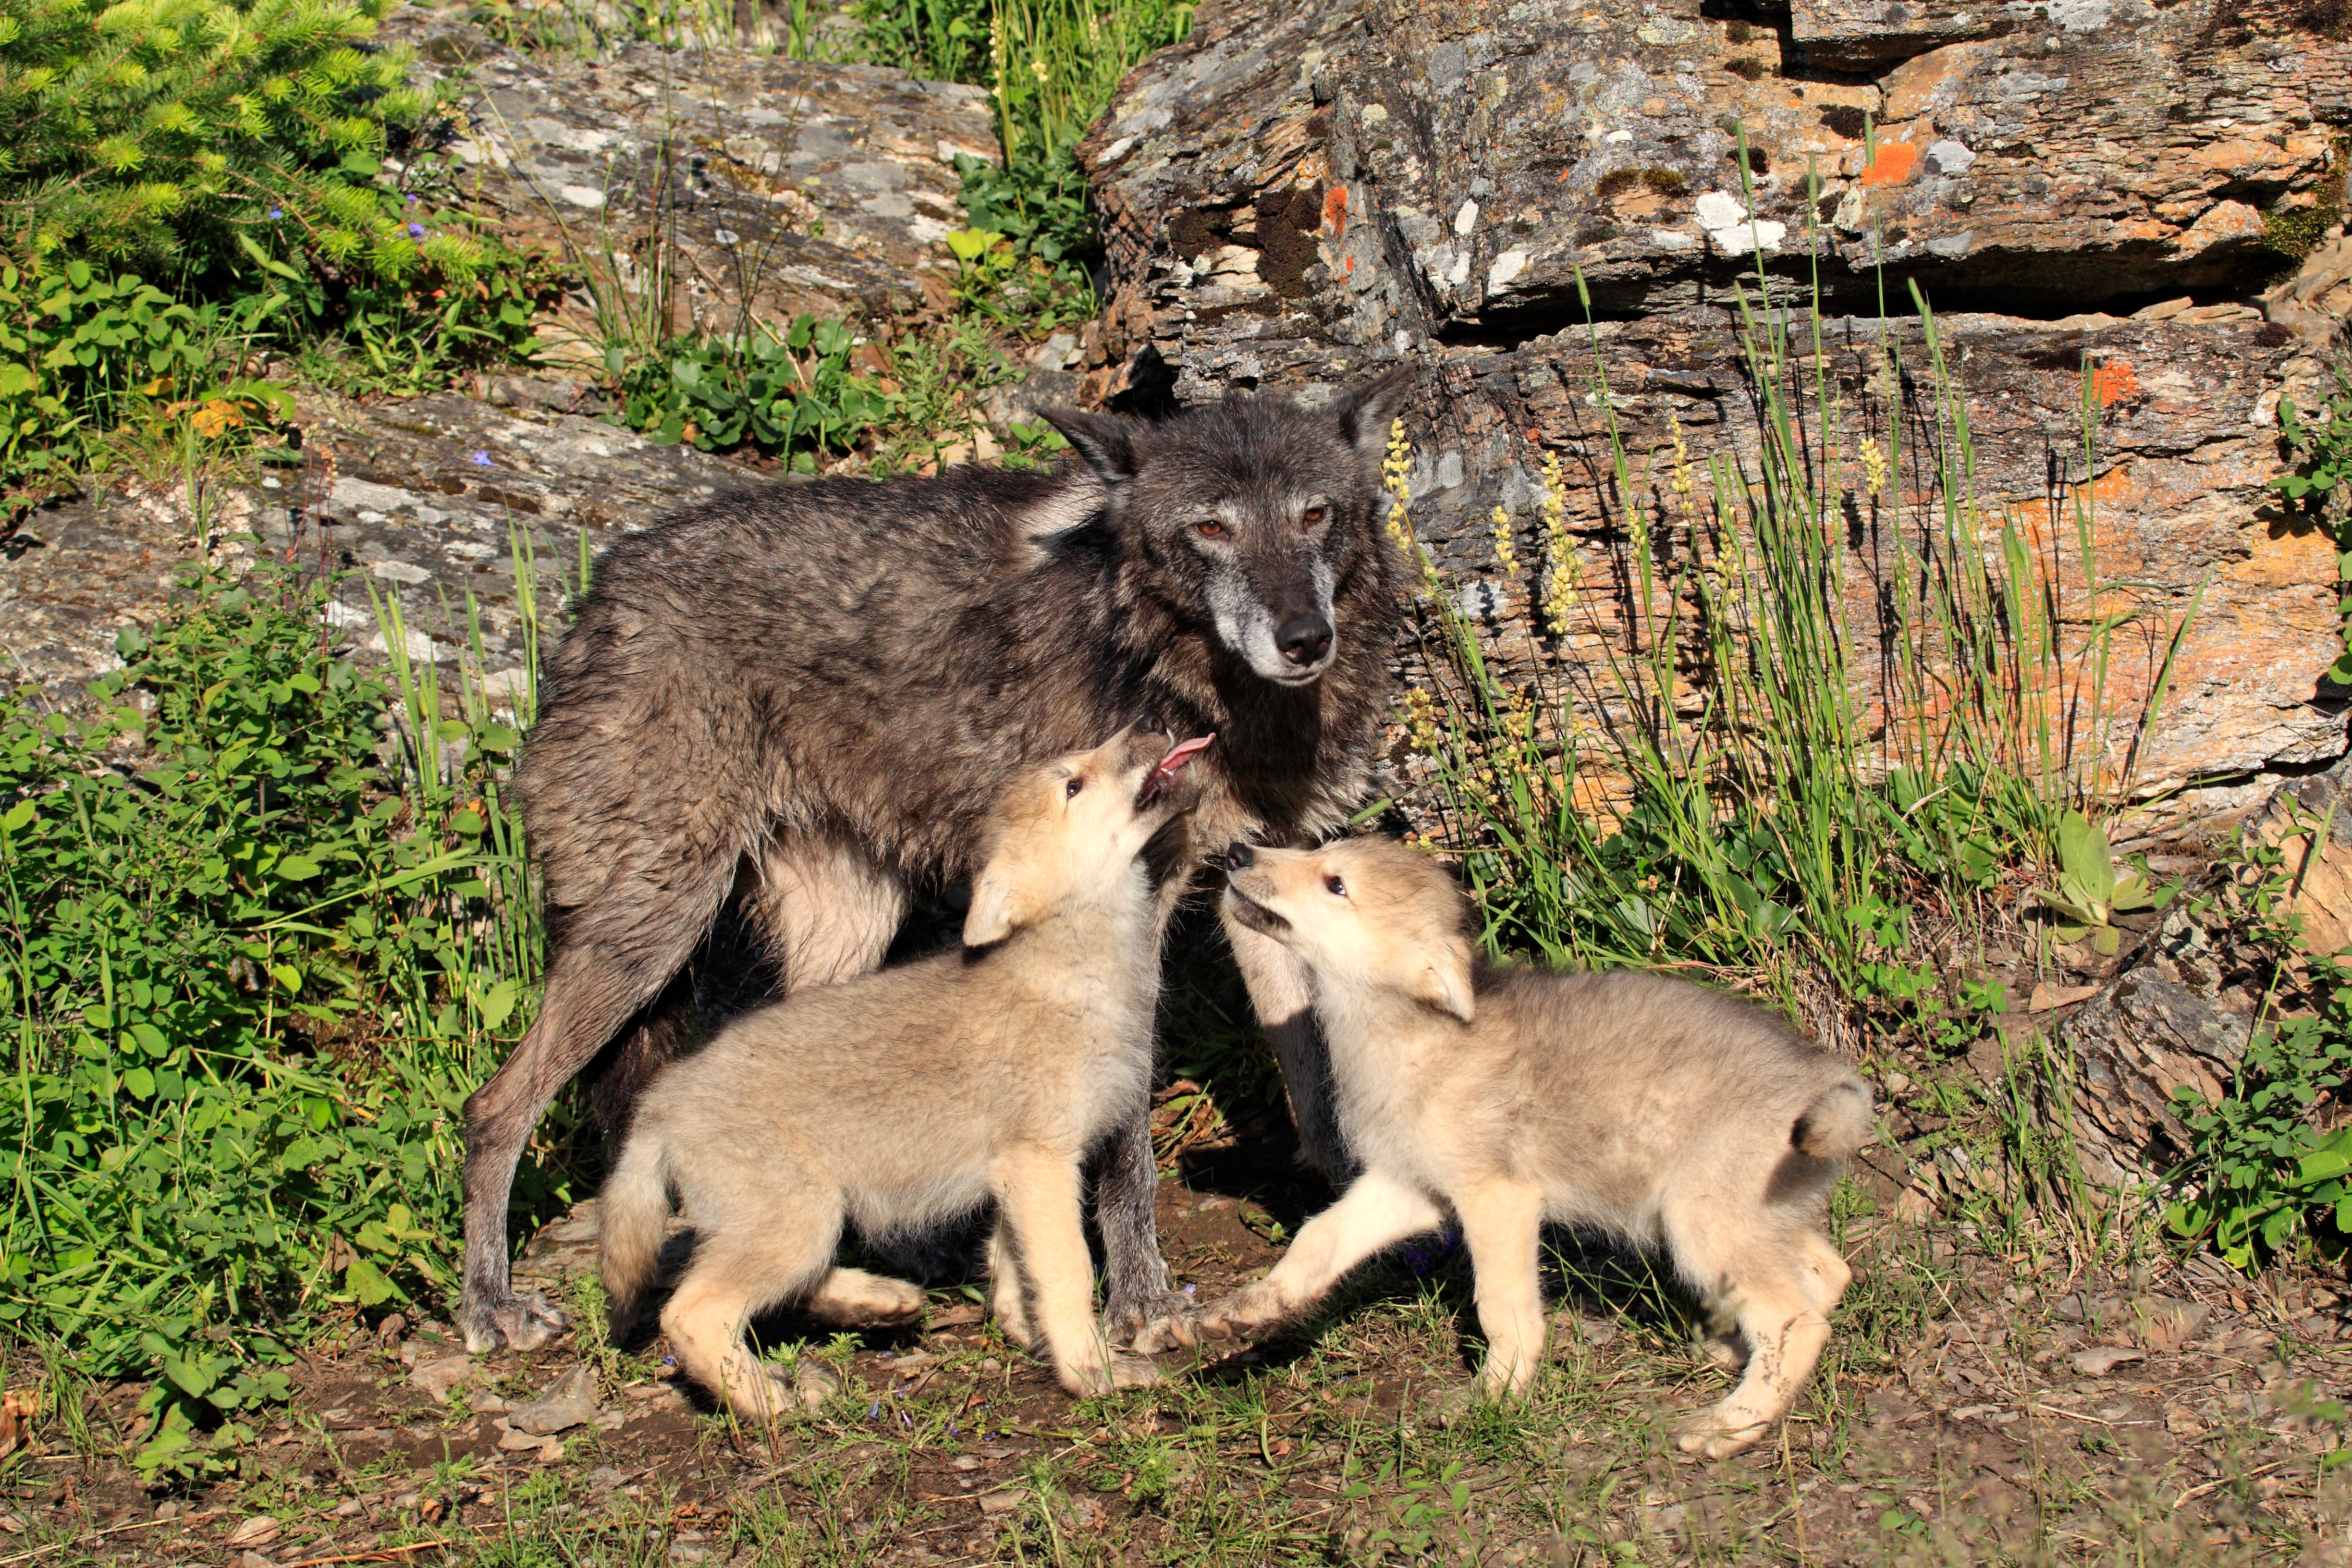 Wolf and two pups. Photo Credit: imageBROKER / Alamy Stock Photo